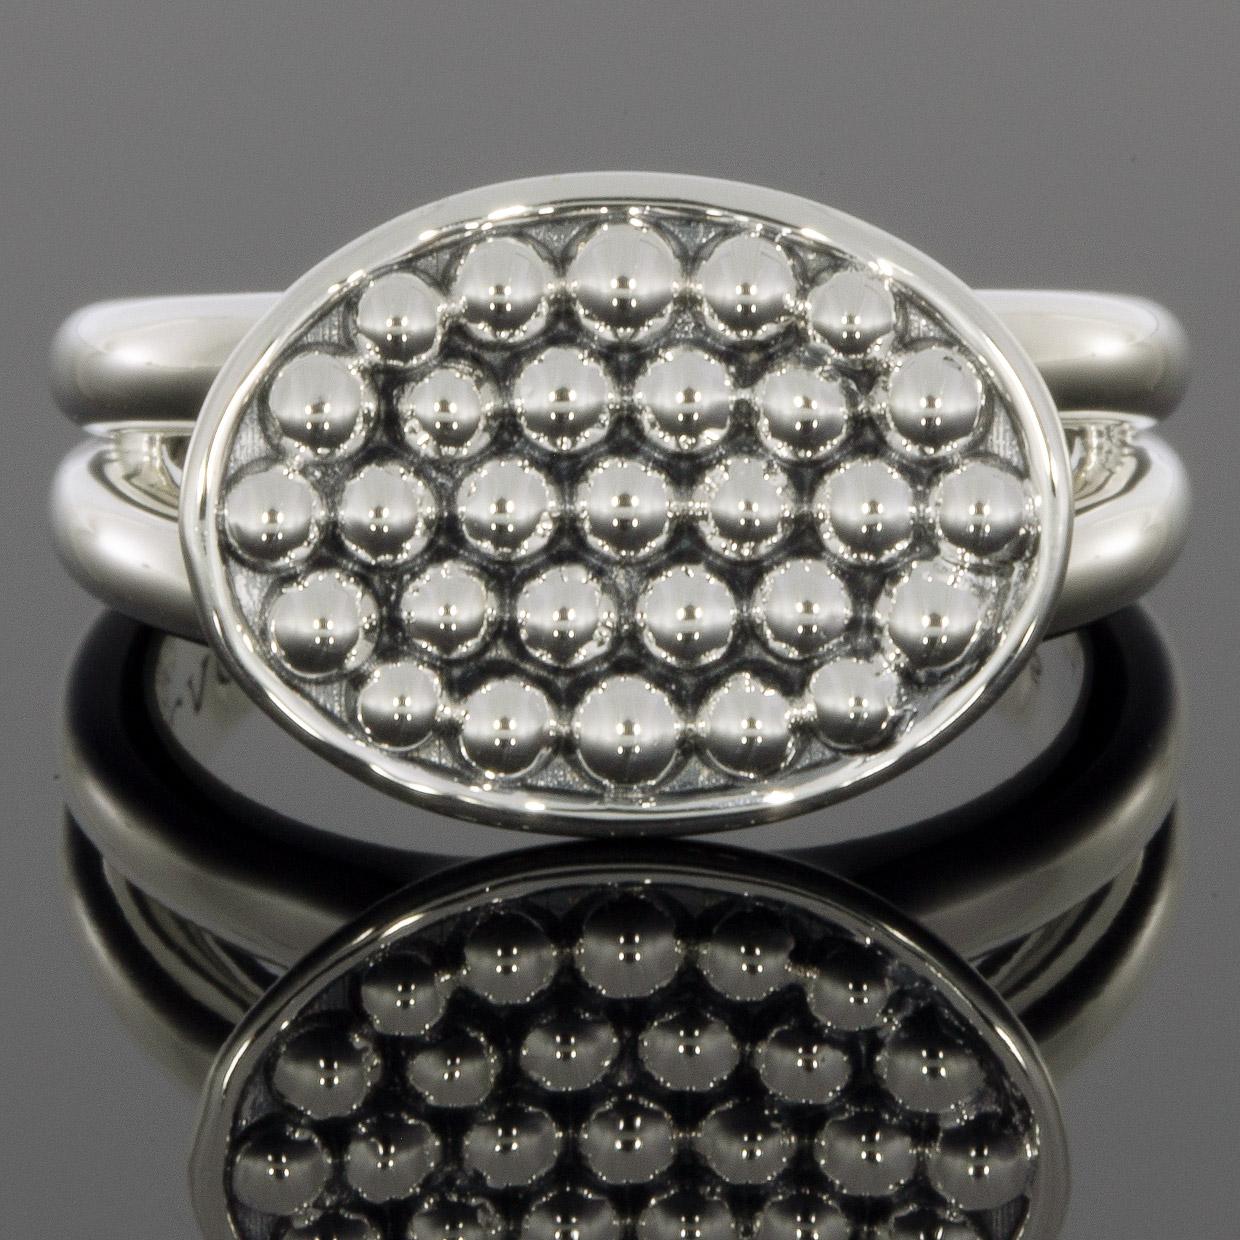 Item Details

Estimated Retail$250.00
Brand Lagos
Collection Bold Caviar
Metal Sterling Silver
Ring Size 7
Sizable YES
Width 16 mm
Metal Purity 925 parts per 1000
Finish Polished
Style BAND

In 1977, LAGOS was founded by artist & master jeweler